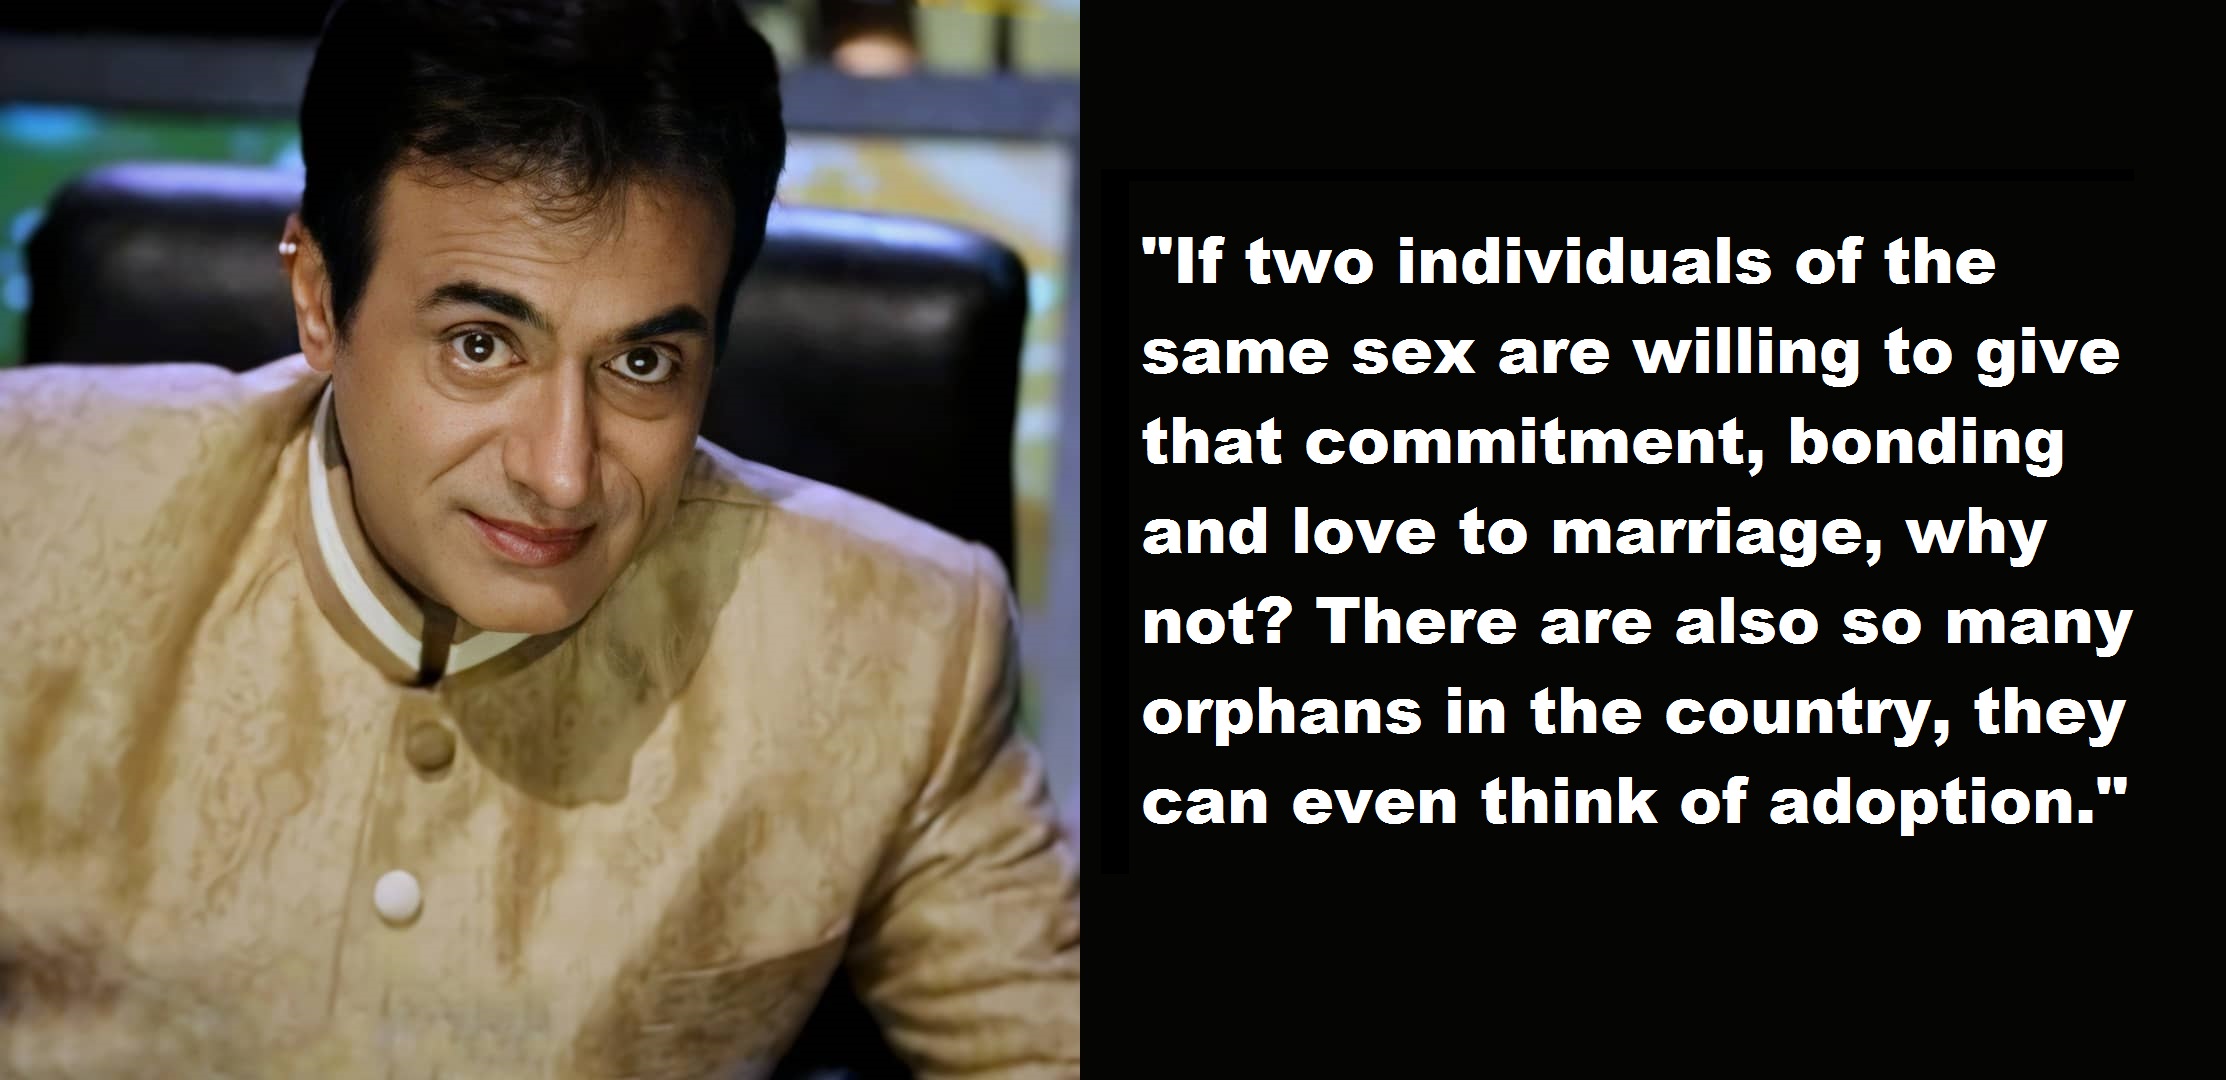 ‘Mahabharat’ Actor Nitish Bharadwaj Speaks On Legalizing Gay Marriages, “Let LGBT Adults Express Their Love Freely”